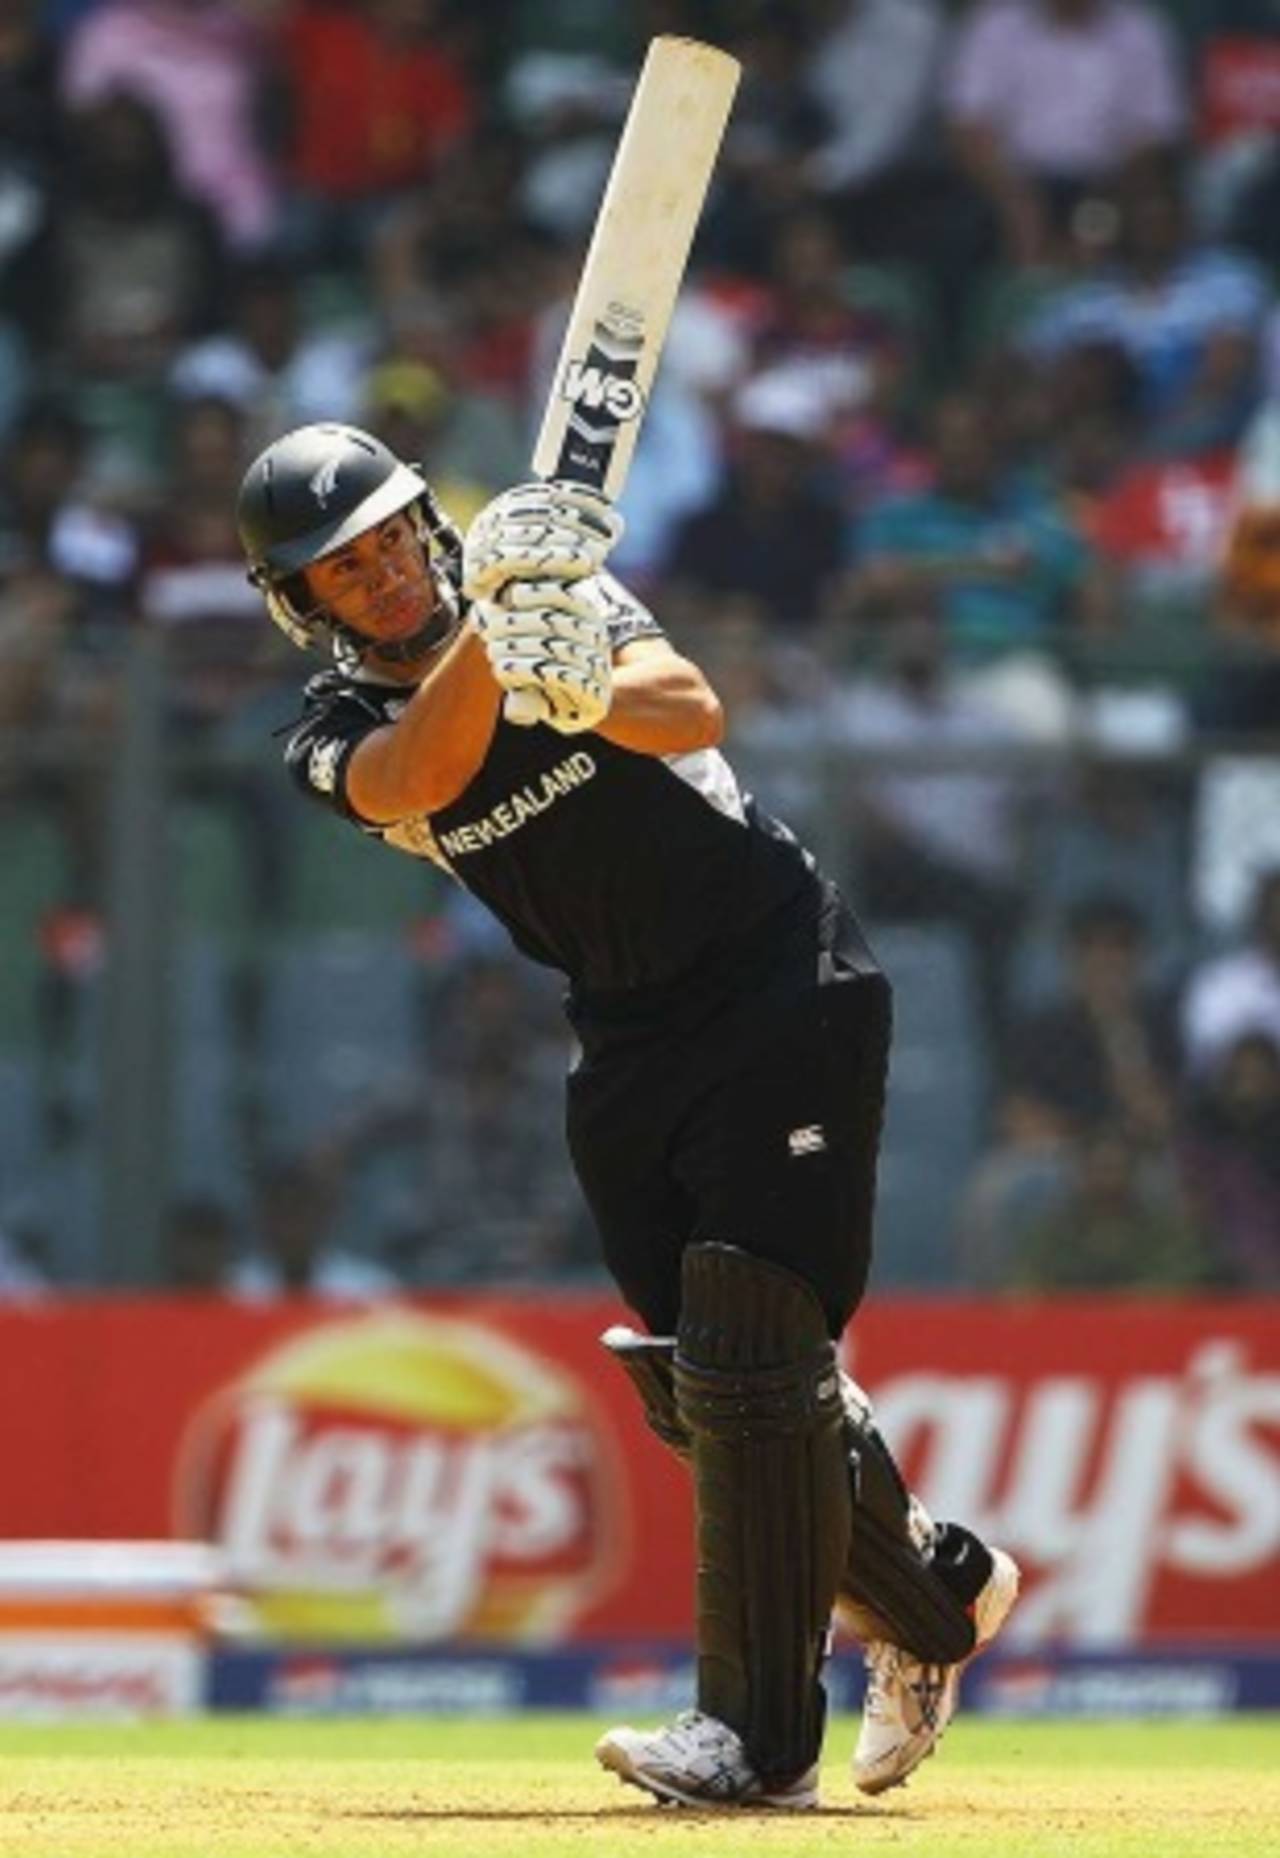 Ross Taylor's cavalier approach often inspires the masses and wins games single-handedly&nbsp;&nbsp;&bull;&nbsp;&nbsp;Getty Images